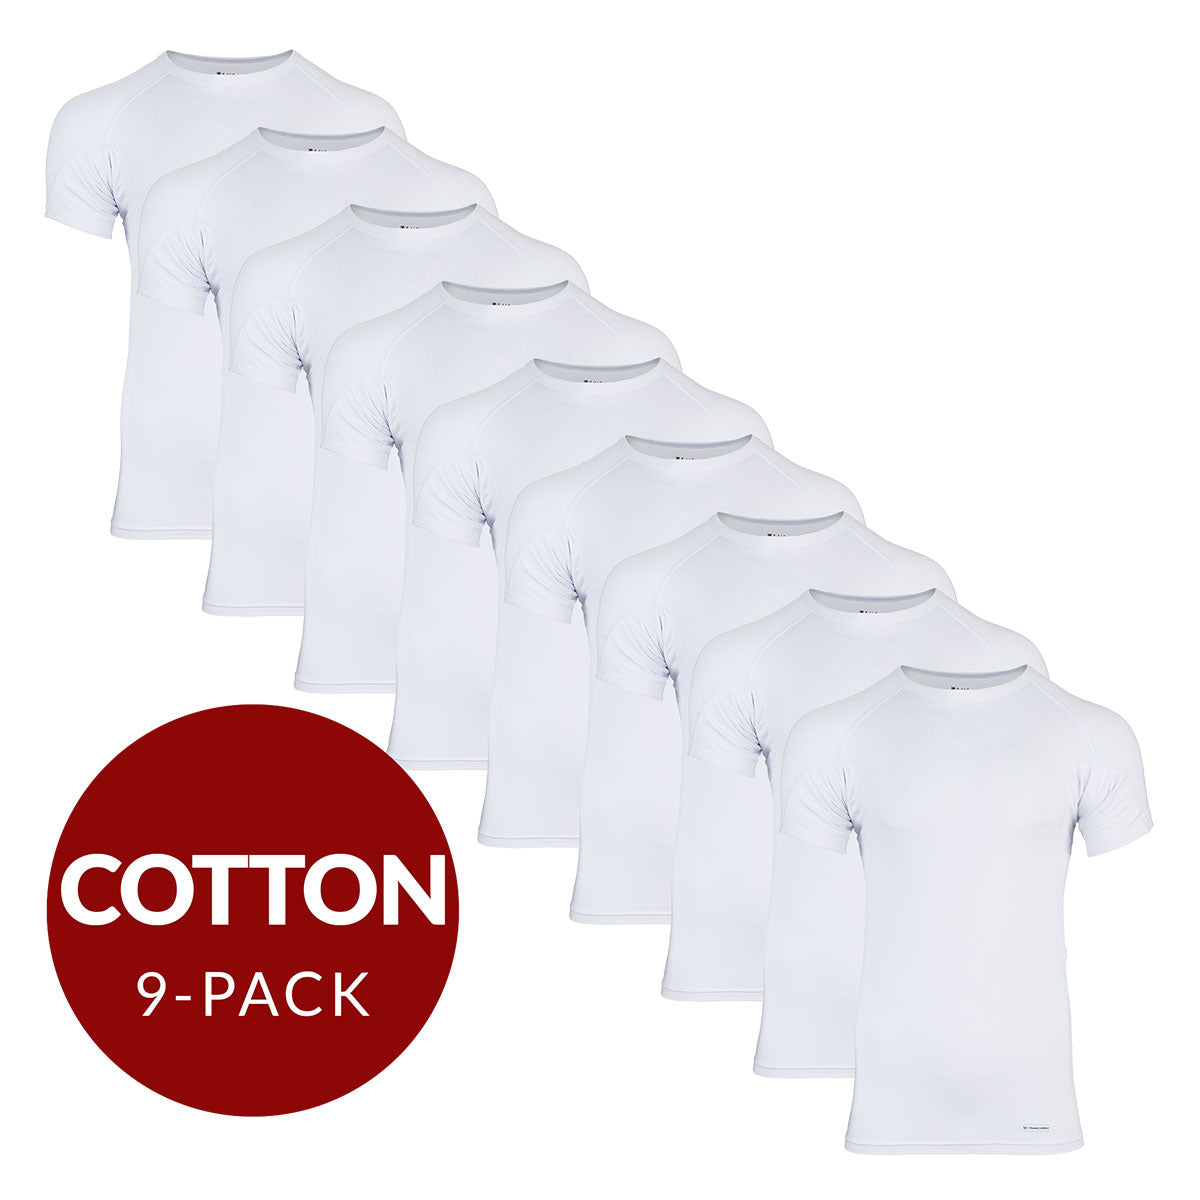 Crew Neck Cotton Sweat Proof Undershirt For Men - White 9-Pack - Ejis